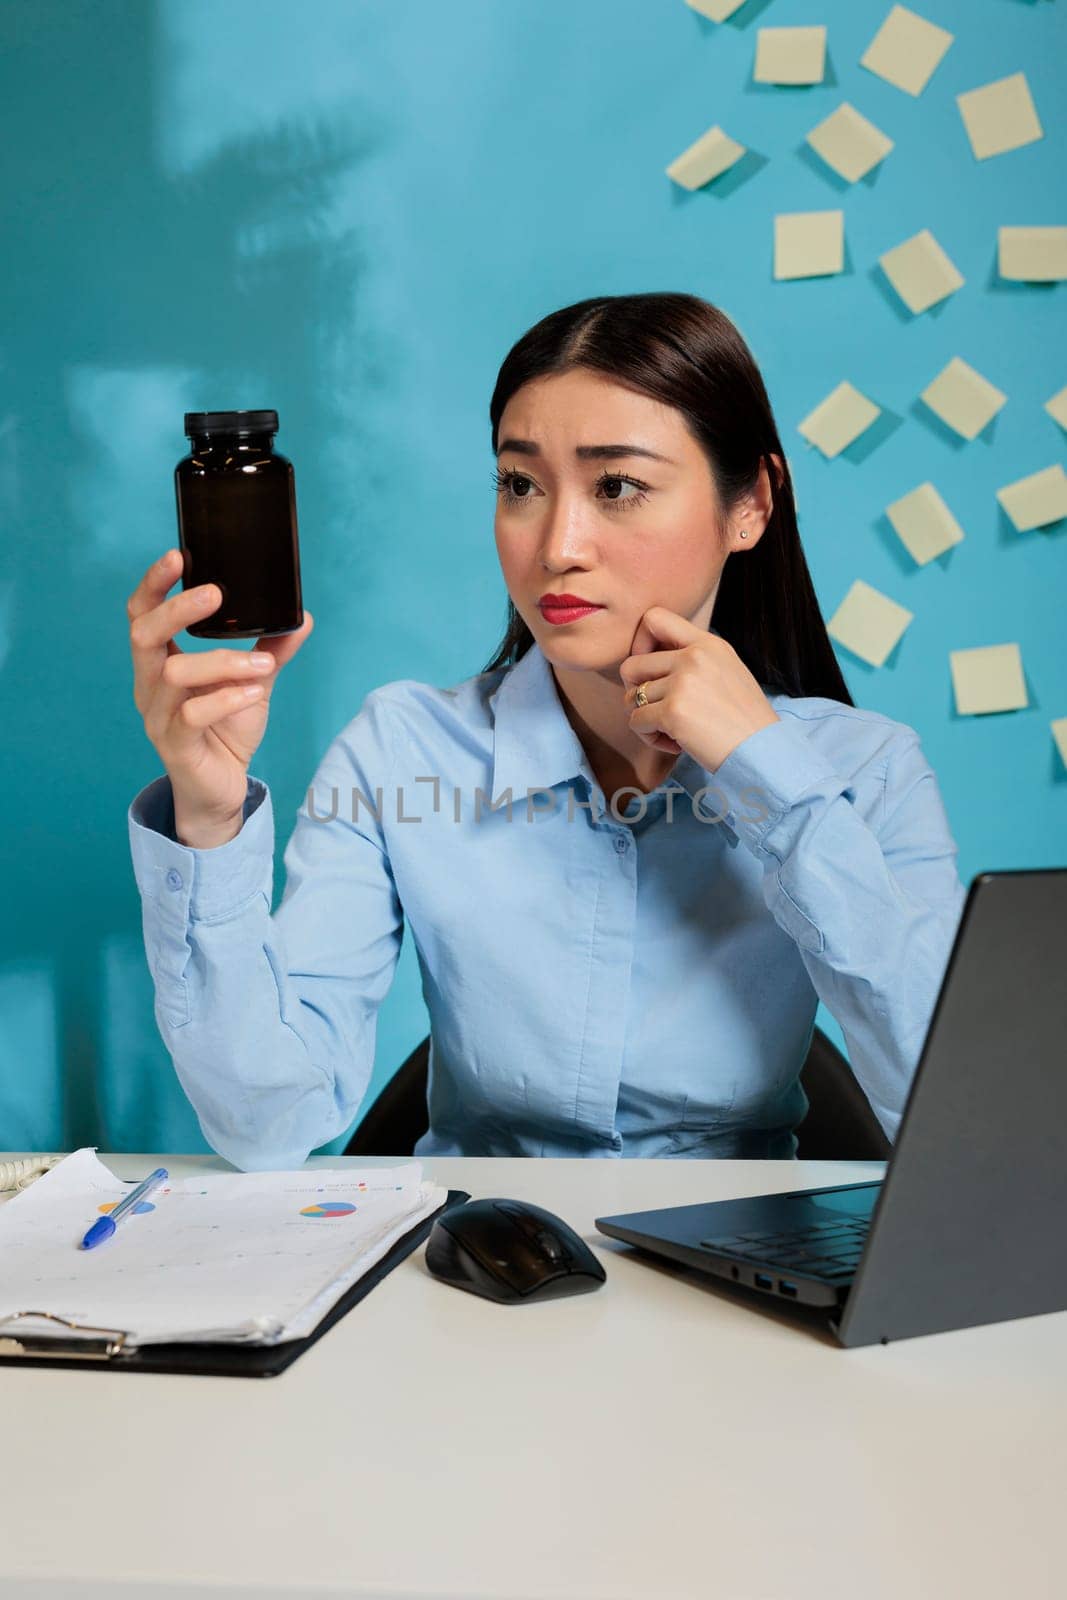 Professional asian startup employee with headache looking at bottle of pills analyzing the components of contains. Woman at office desk looking doubtfully at a container of tablets.